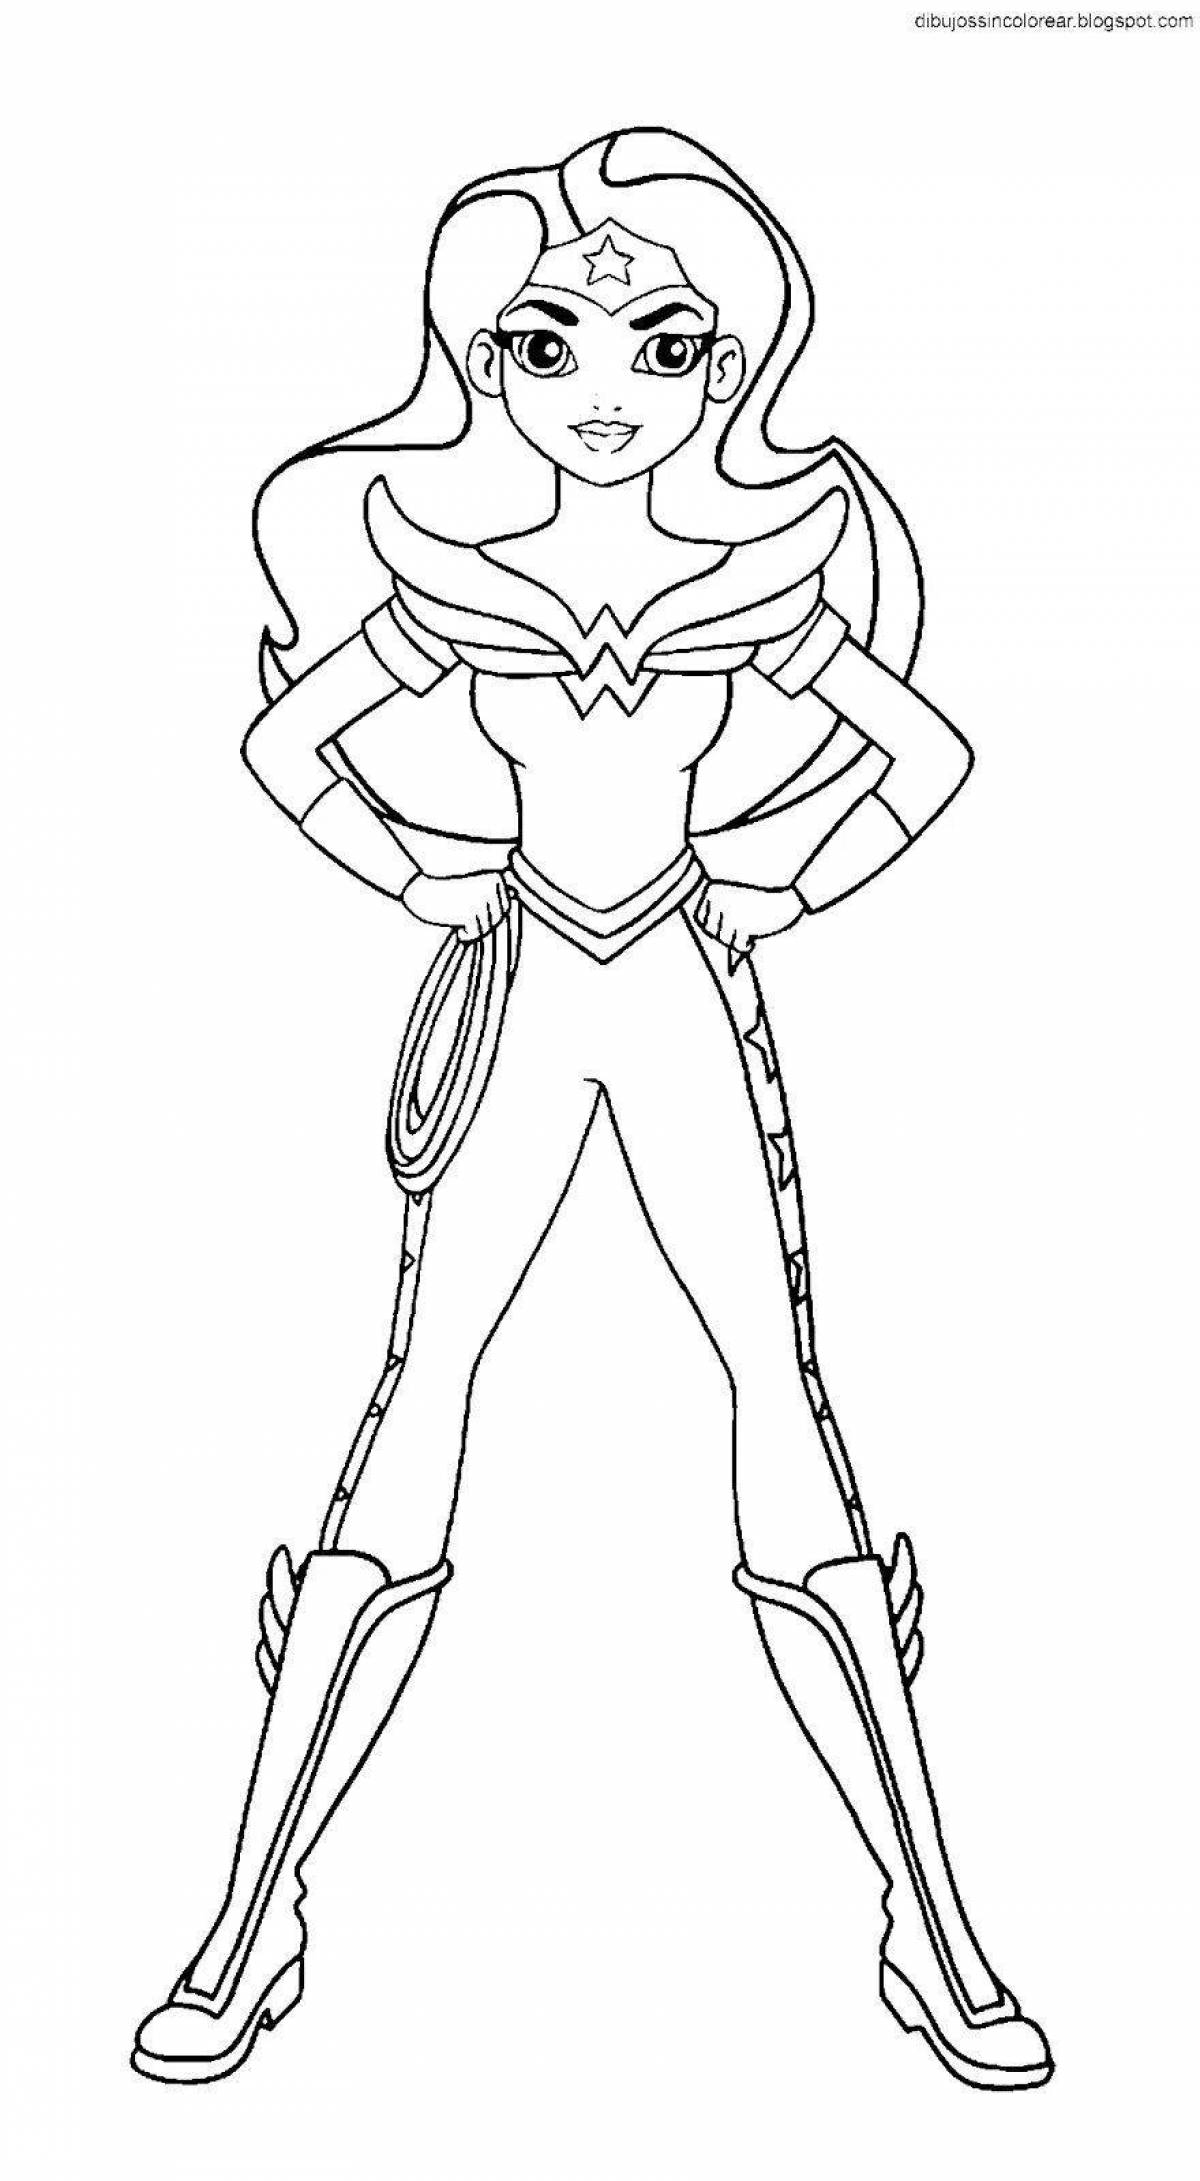 Intriguing super hero high coloring page